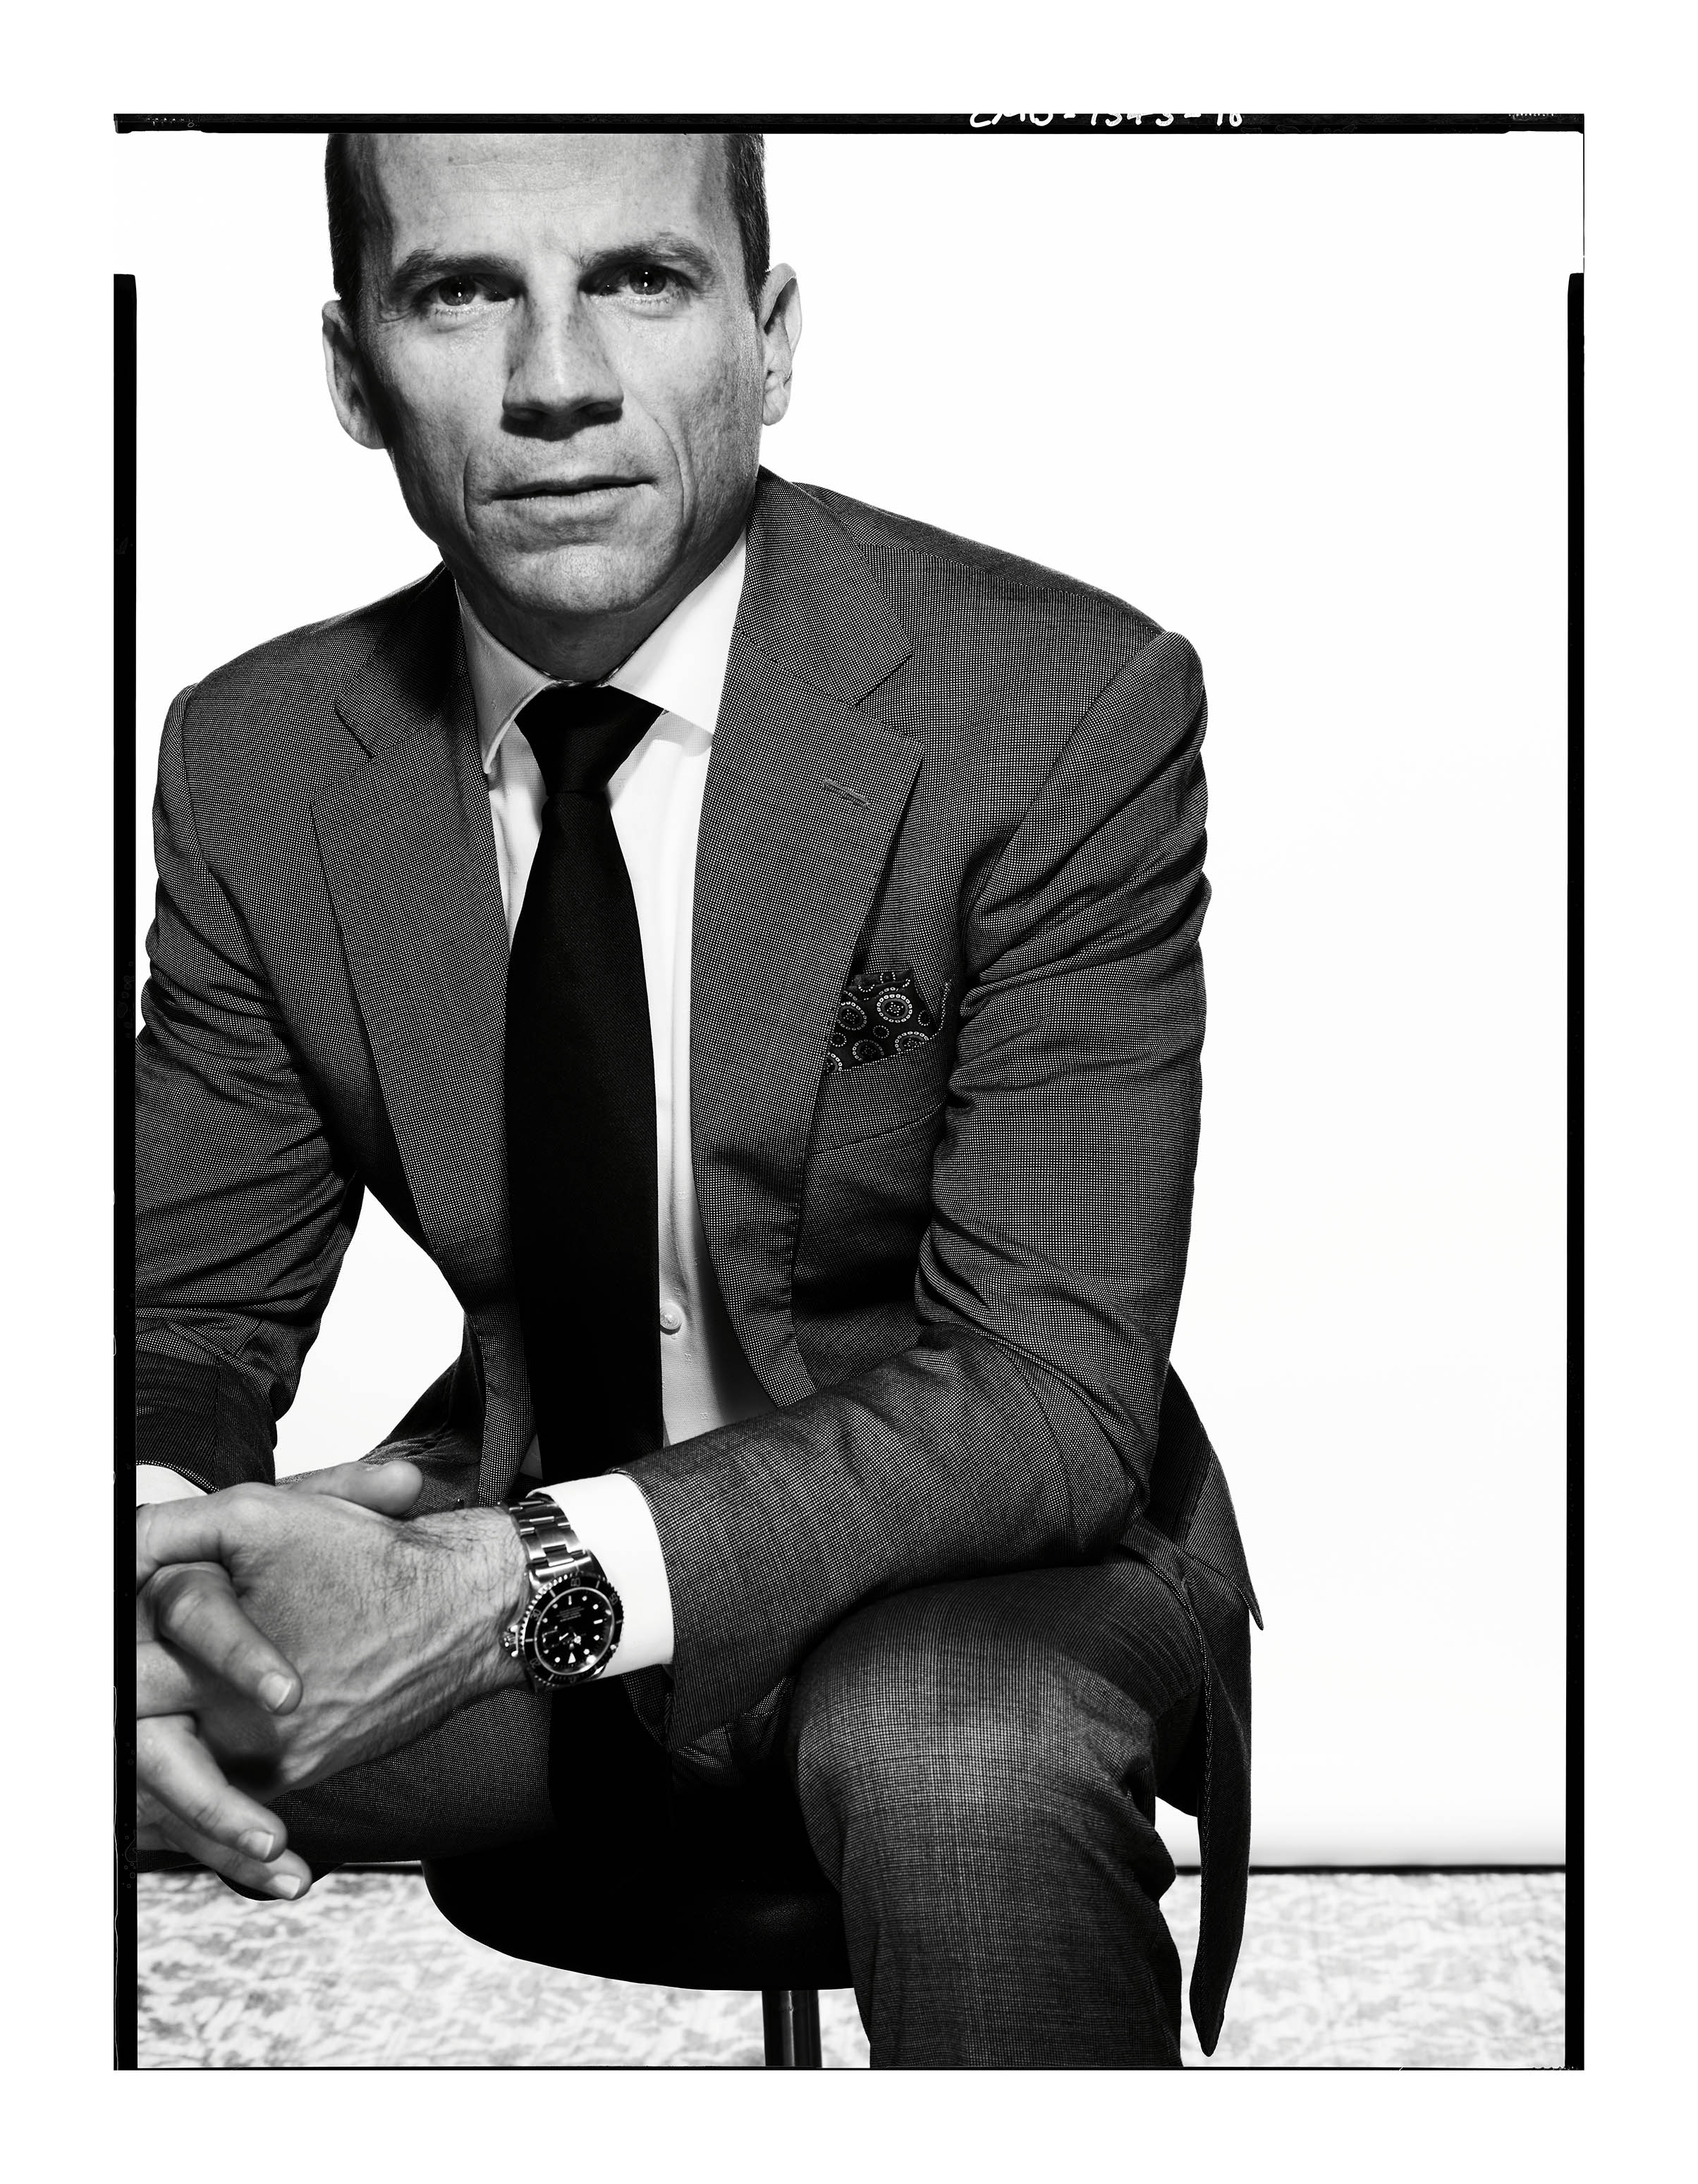 Former Navy Seal Officer Chris Fussell will present “Leading Teams in Complex Environments” on March 7.